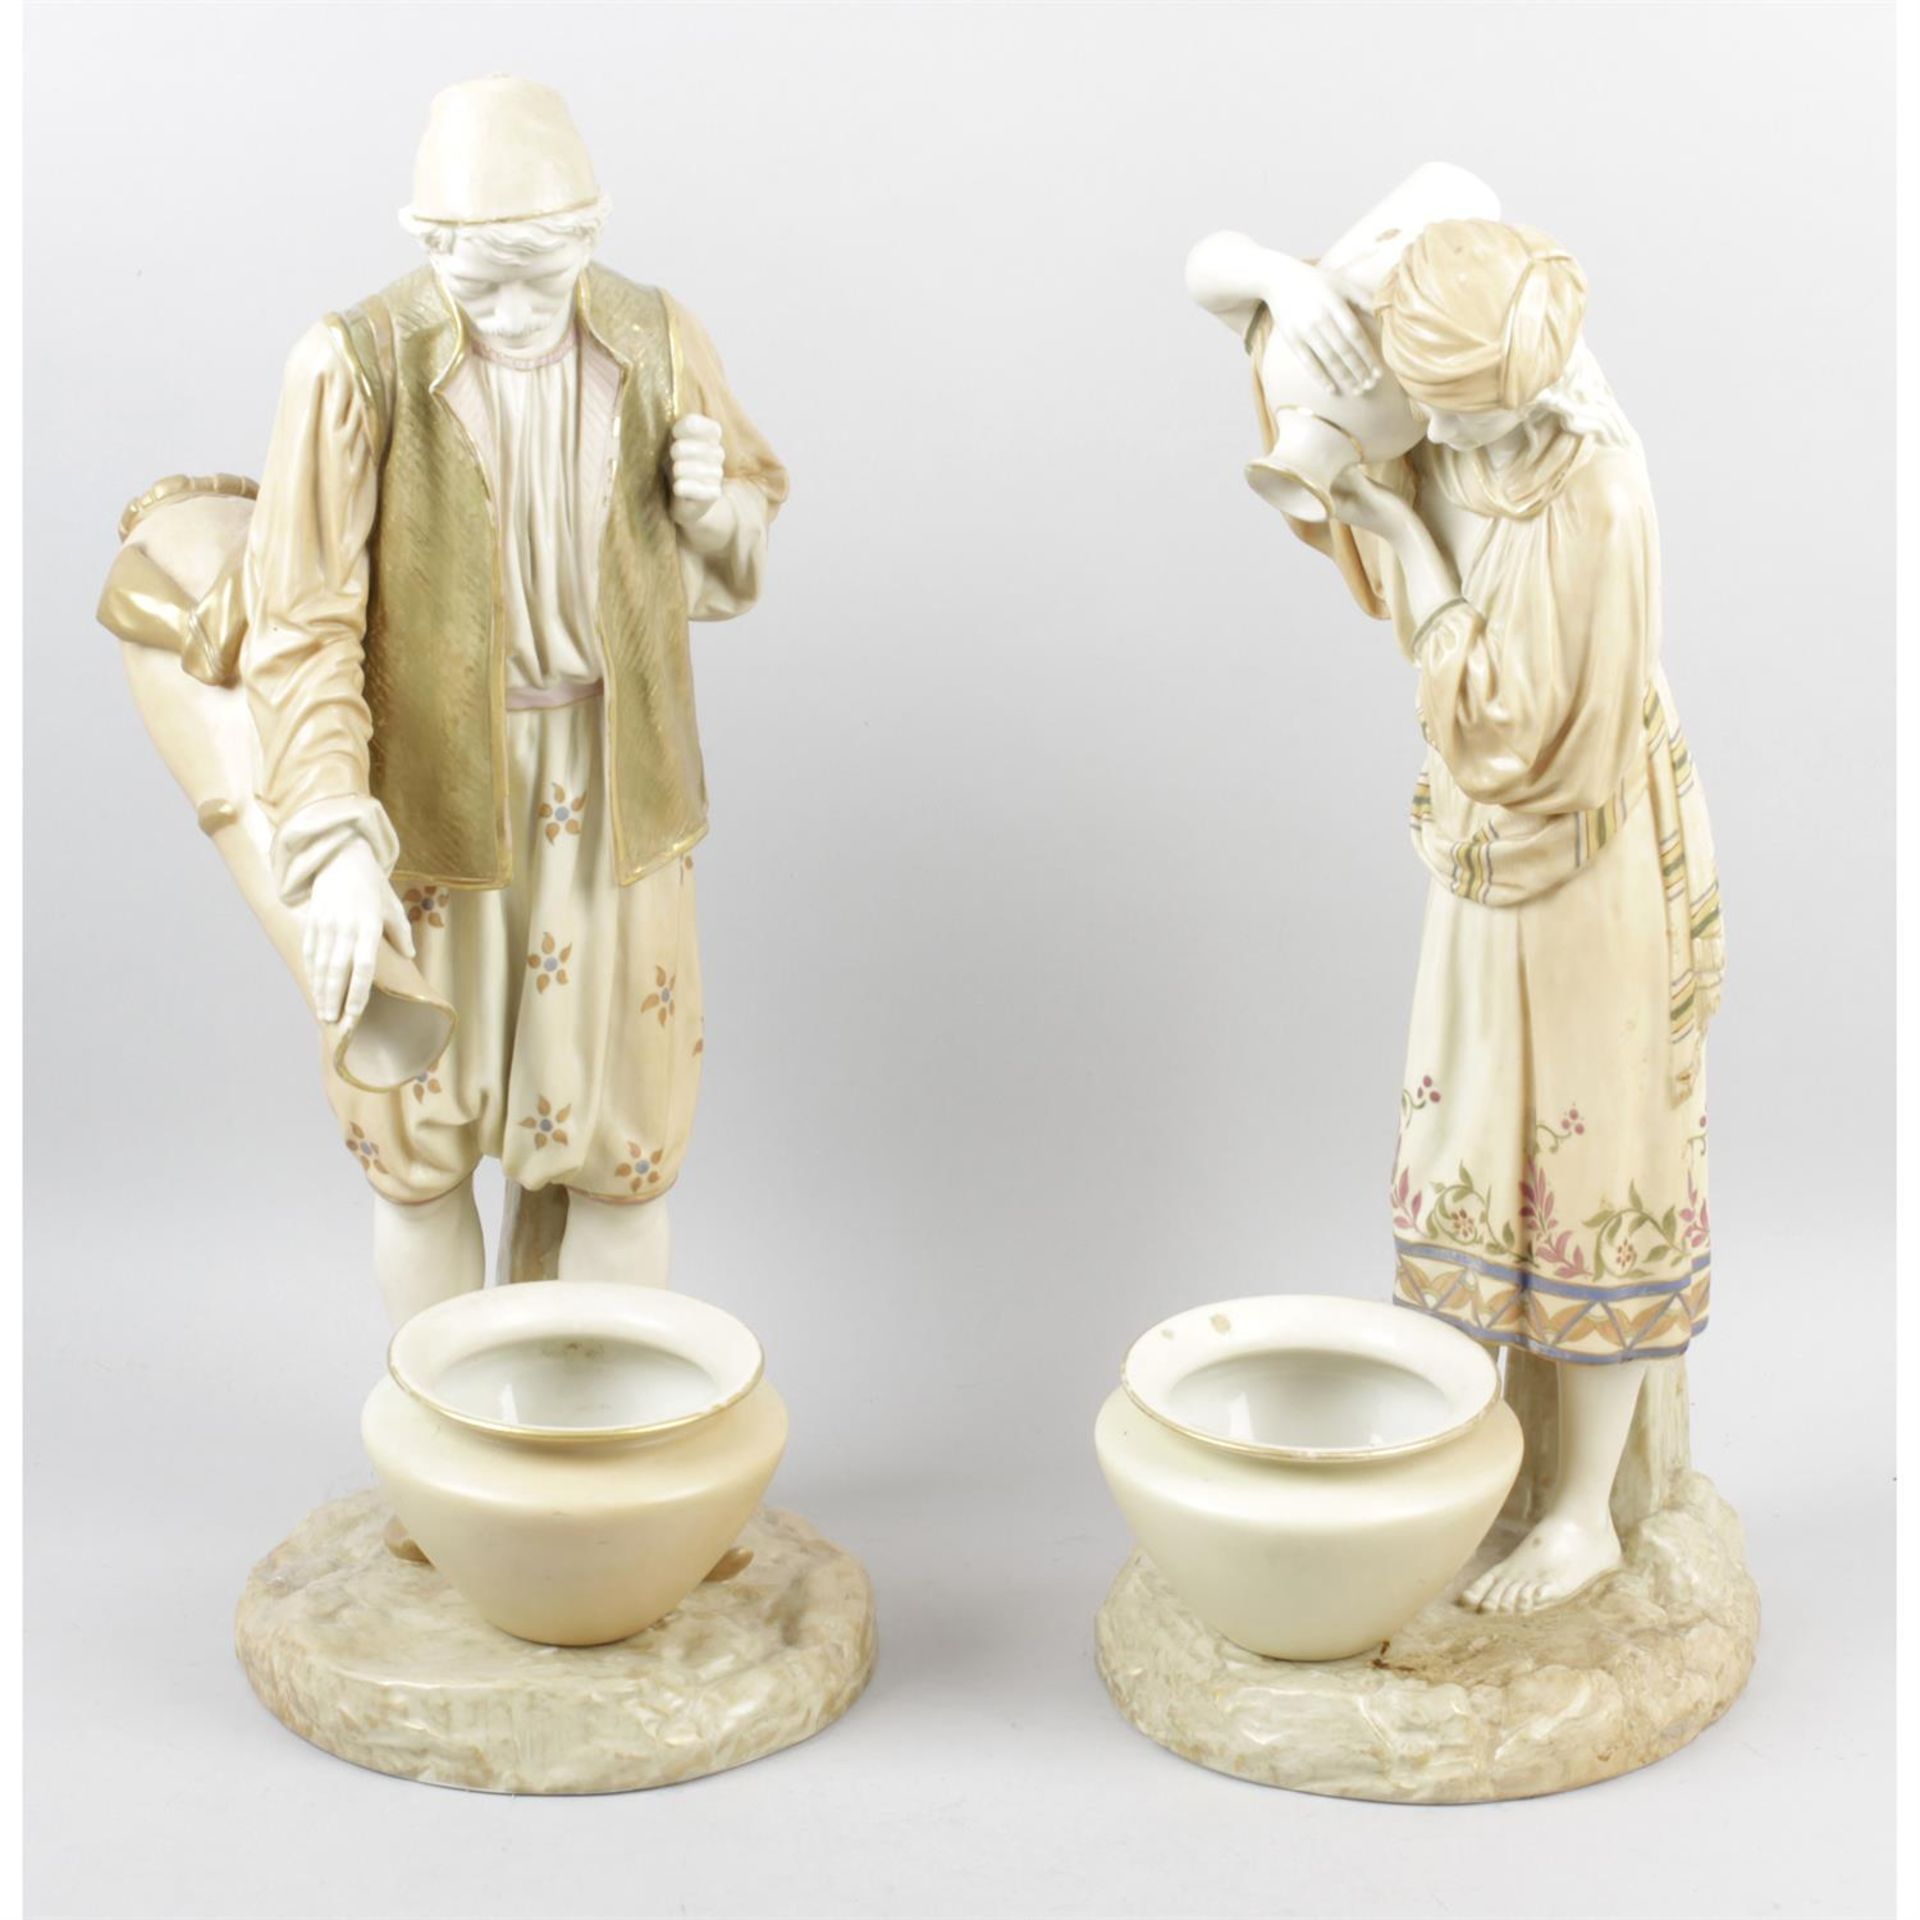 A large impressive pair of Royal Worcester bone china figures designed by James Hadley.